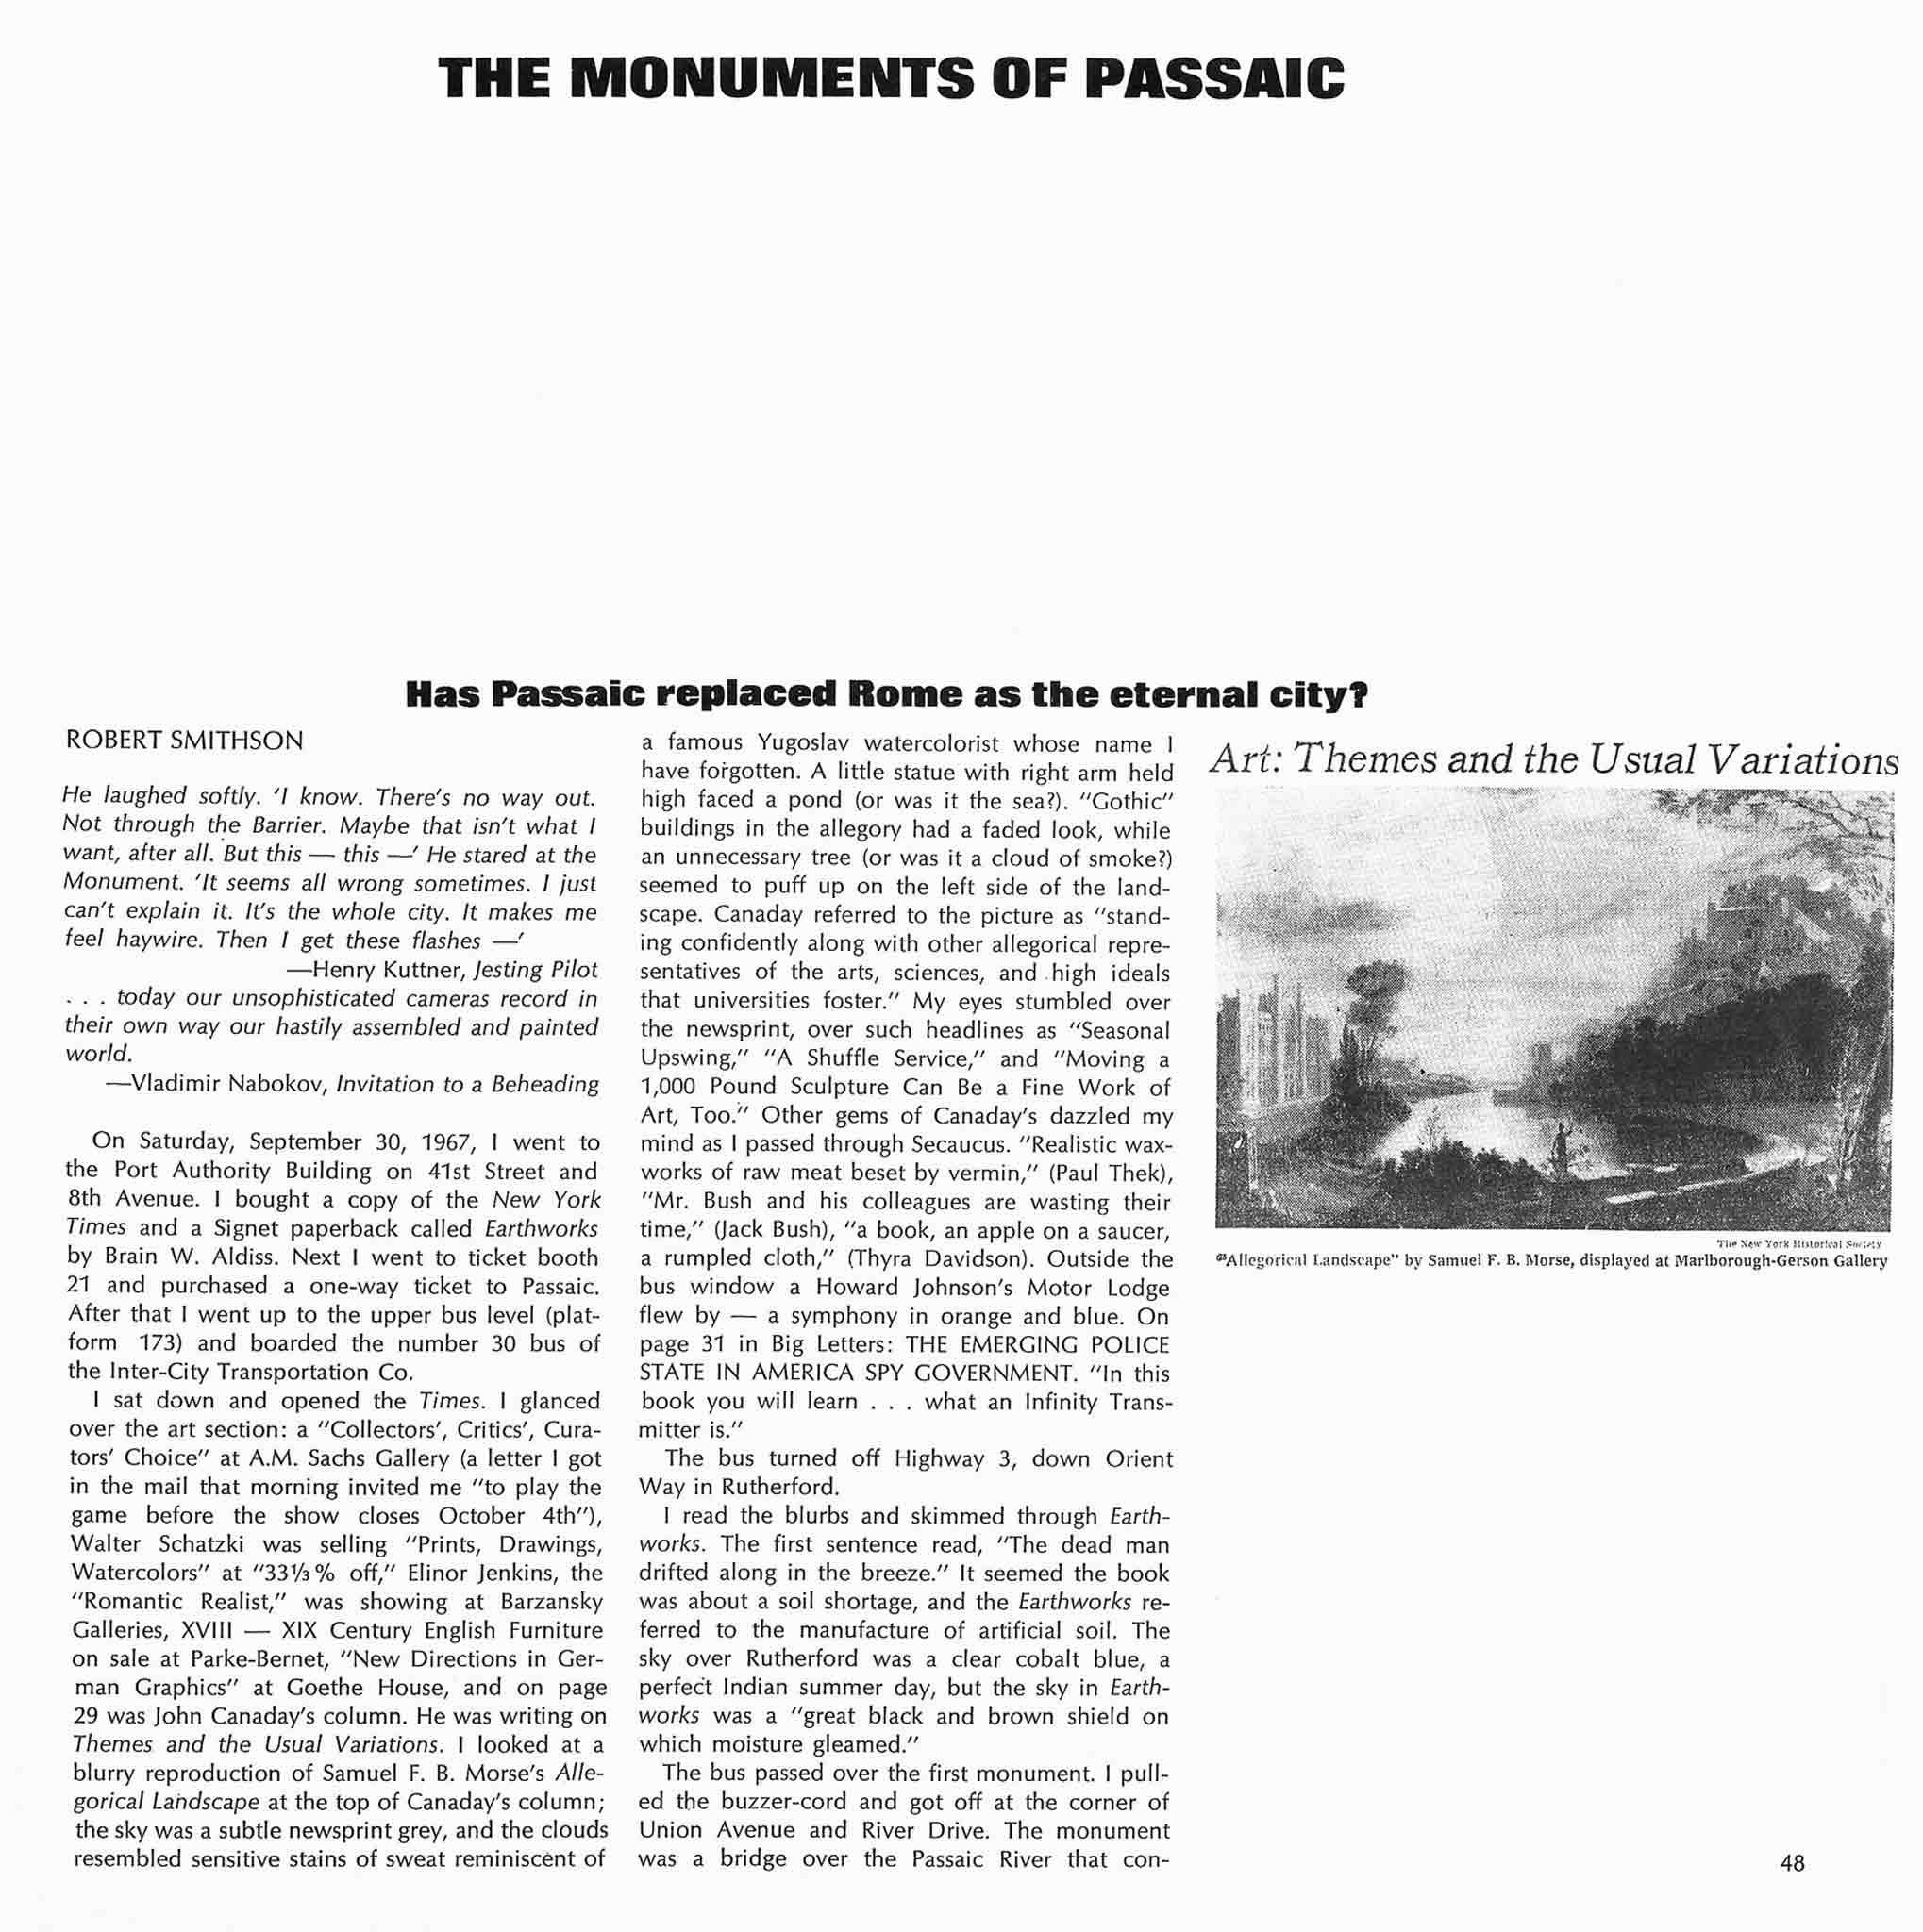 Magazine layout with title of article "Monuments of Passaic" on top.  Text in lower left and black and white image of an etching on right side.